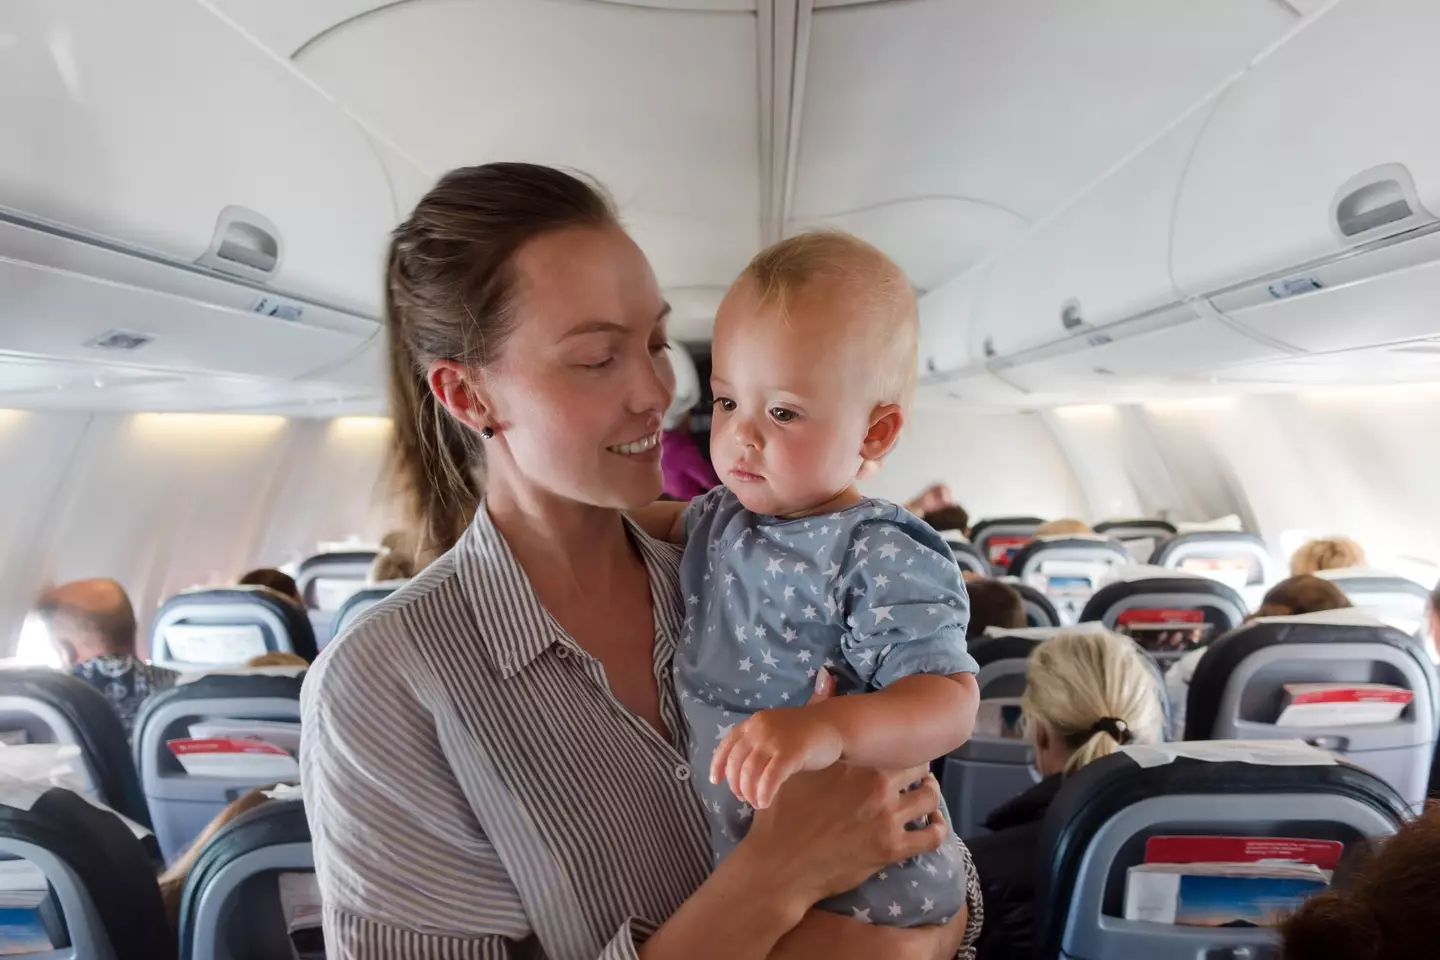 Taking your baby on a flight can be stressful.